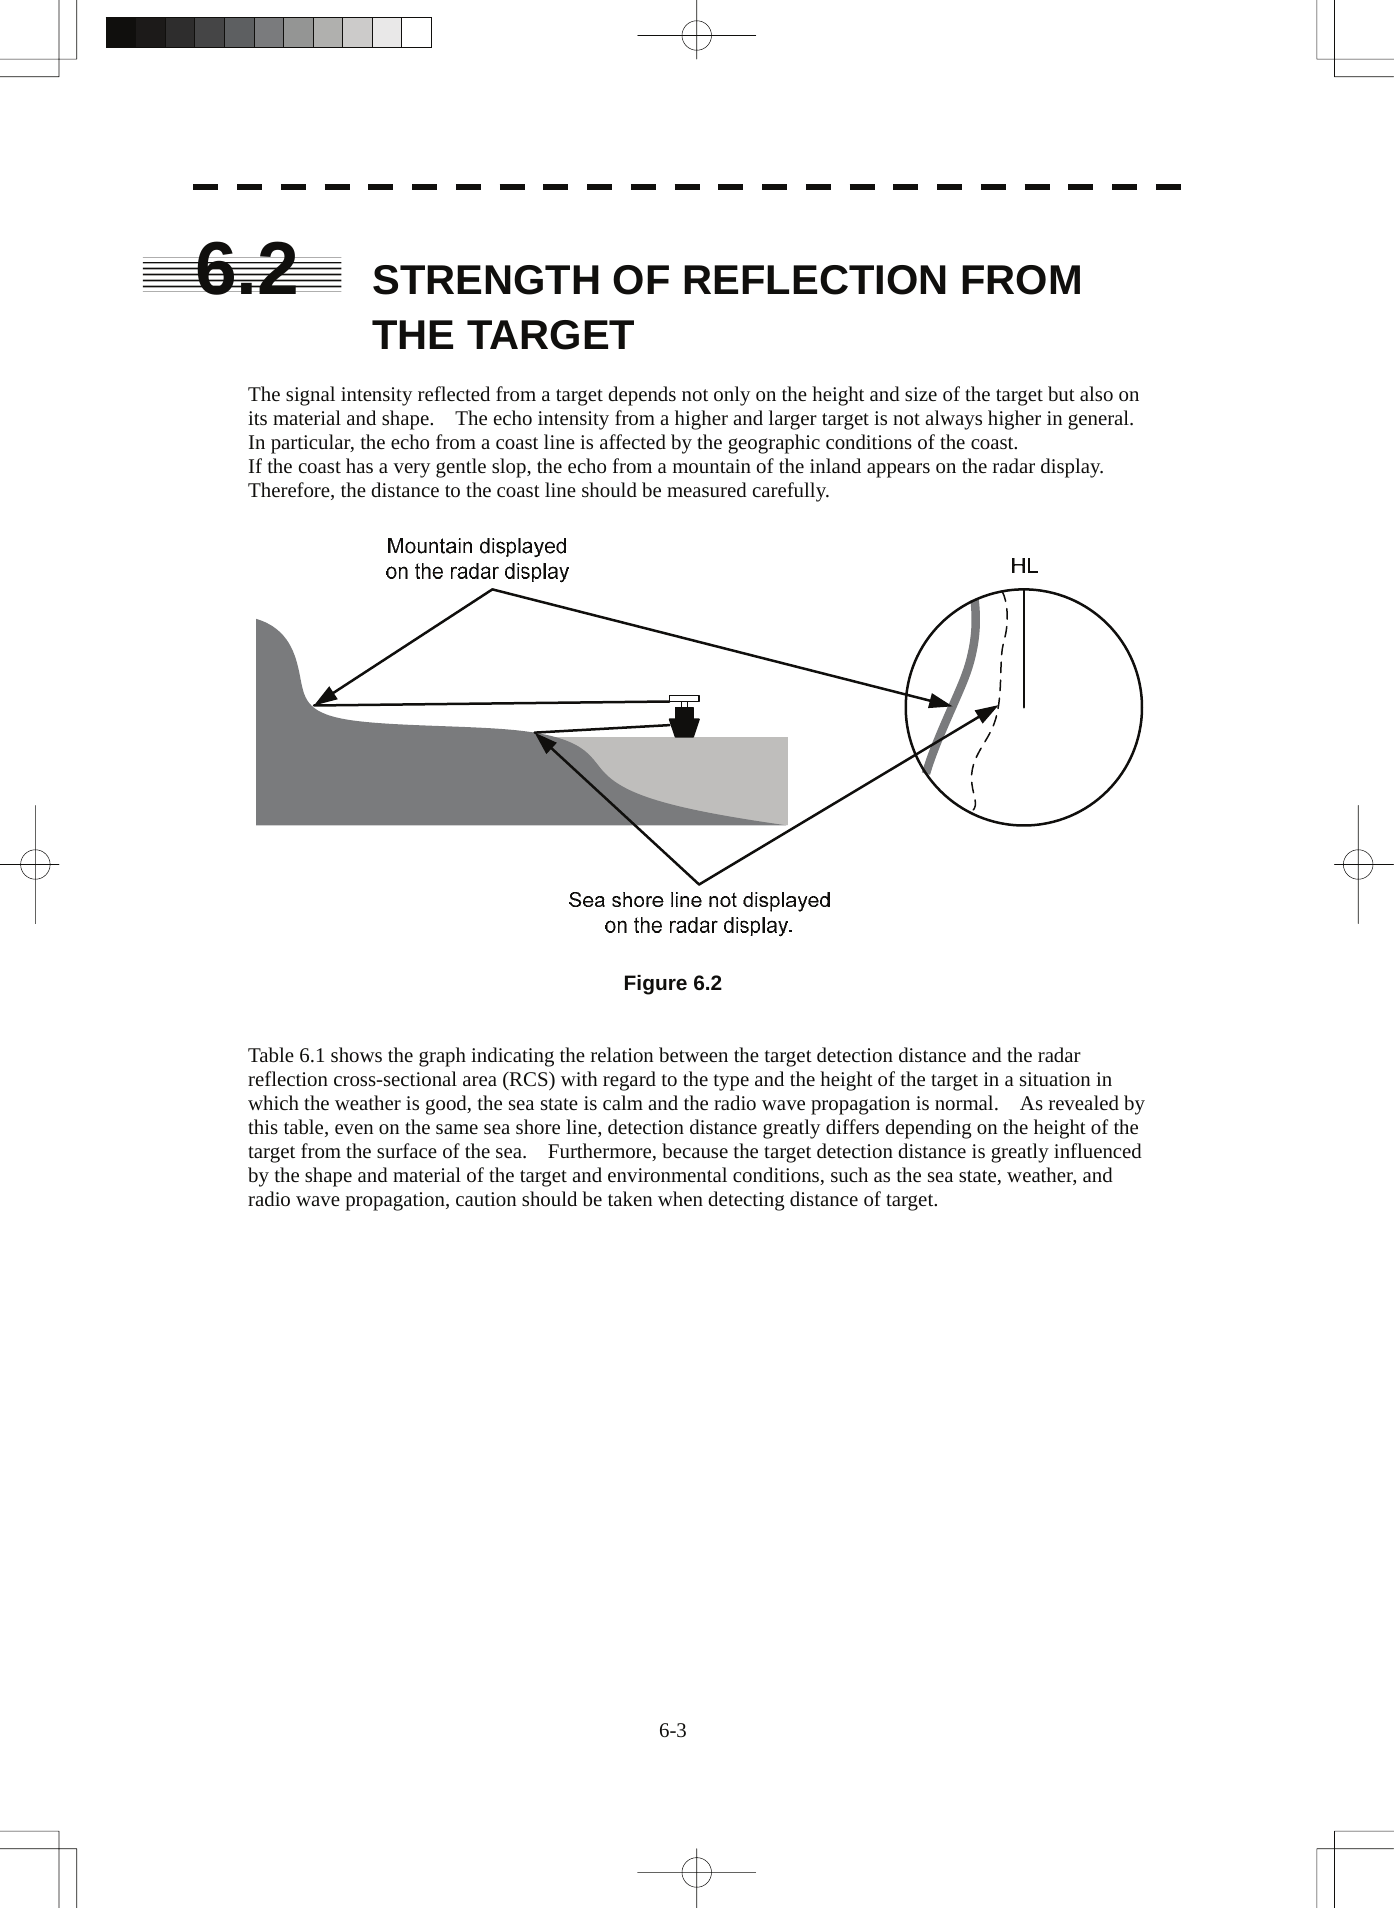  6-3 6.2  STRENGTH OF REFLECTION FROM THE TARGET  The signal intensity reflected from a target depends not only on the height and size of the target but also on its material and shape.    The echo intensity from a higher and larger target is not always higher in general. In particular, the echo from a coast line is affected by the geographic conditions of the coast. If the coast has a very gentle slop, the echo from a mountain of the inland appears on the radar display. Therefore, the distance to the coast line should be measured carefully.    Figure 6.2   Table 6.1 shows the graph indicating the relation between the target detection distance and the radar reflection cross-sectional area (RCS) with regard to the type and the height of the target in a situation in which the weather is good, the sea state is calm and the radio wave propagation is normal.    As revealed by this table, even on the same sea shore line, detection distance greatly differs depending on the height of the target from the surface of the sea.    Furthermore, because the target detection distance is greatly influenced by the shape and material of the target and environmental conditions, such as the sea state, weather, and radio wave propagation, caution should be taken when detecting distance of target.  